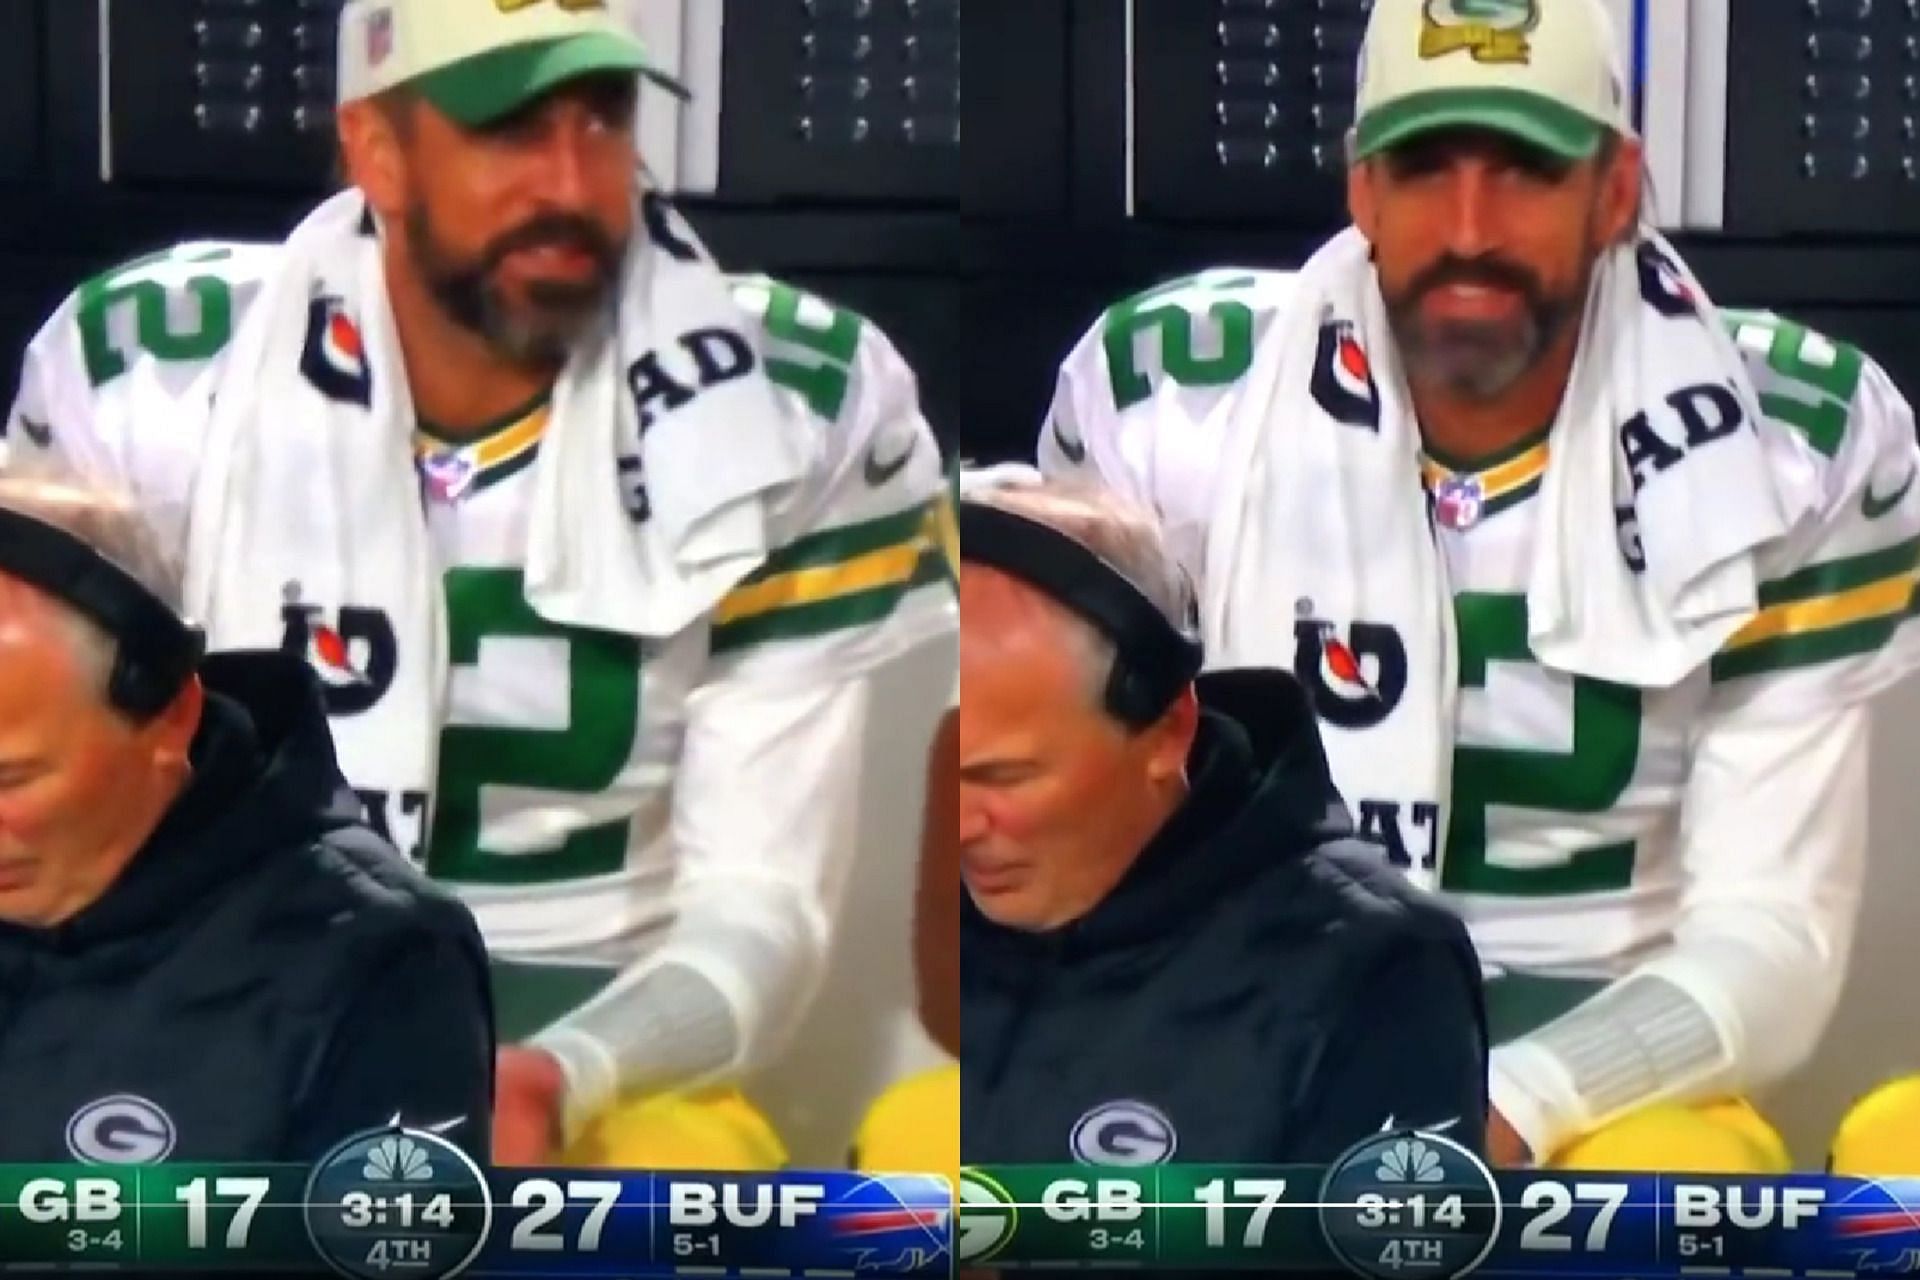 Why's he on the sideline laughing?” – NFL fans rip Aaron Rodgers